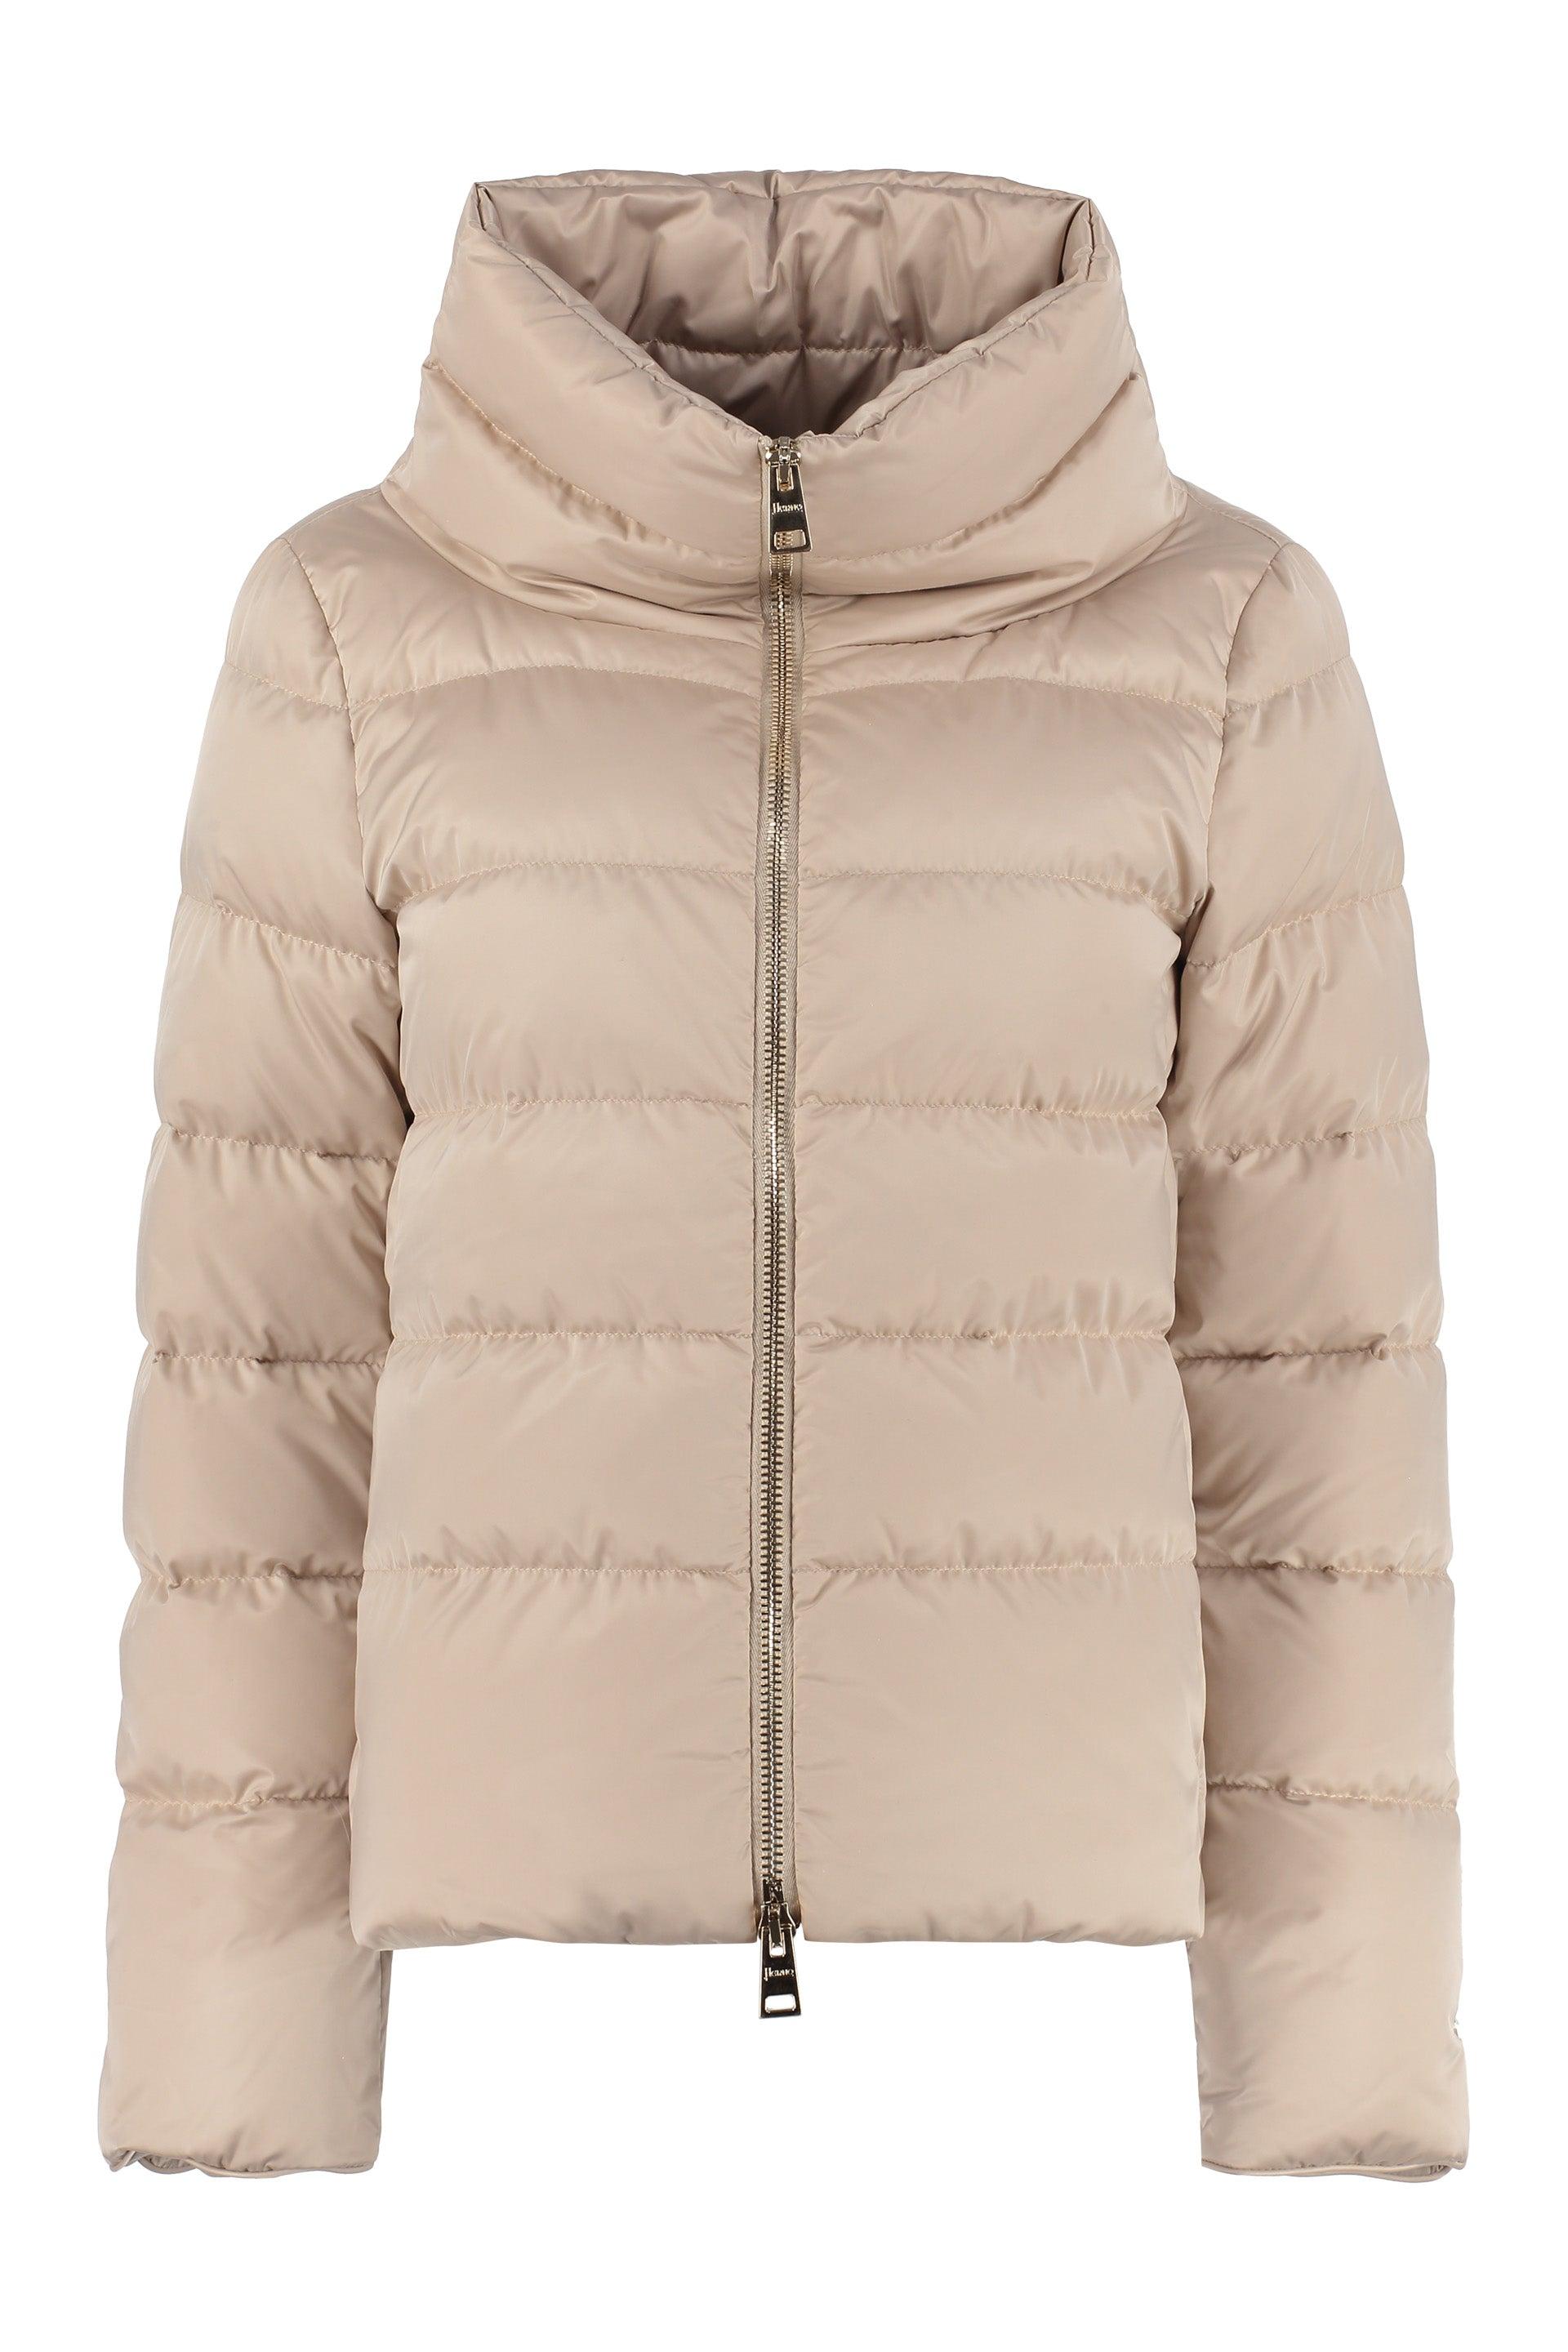 Herno Short Down Jacket in Natural | Lyst